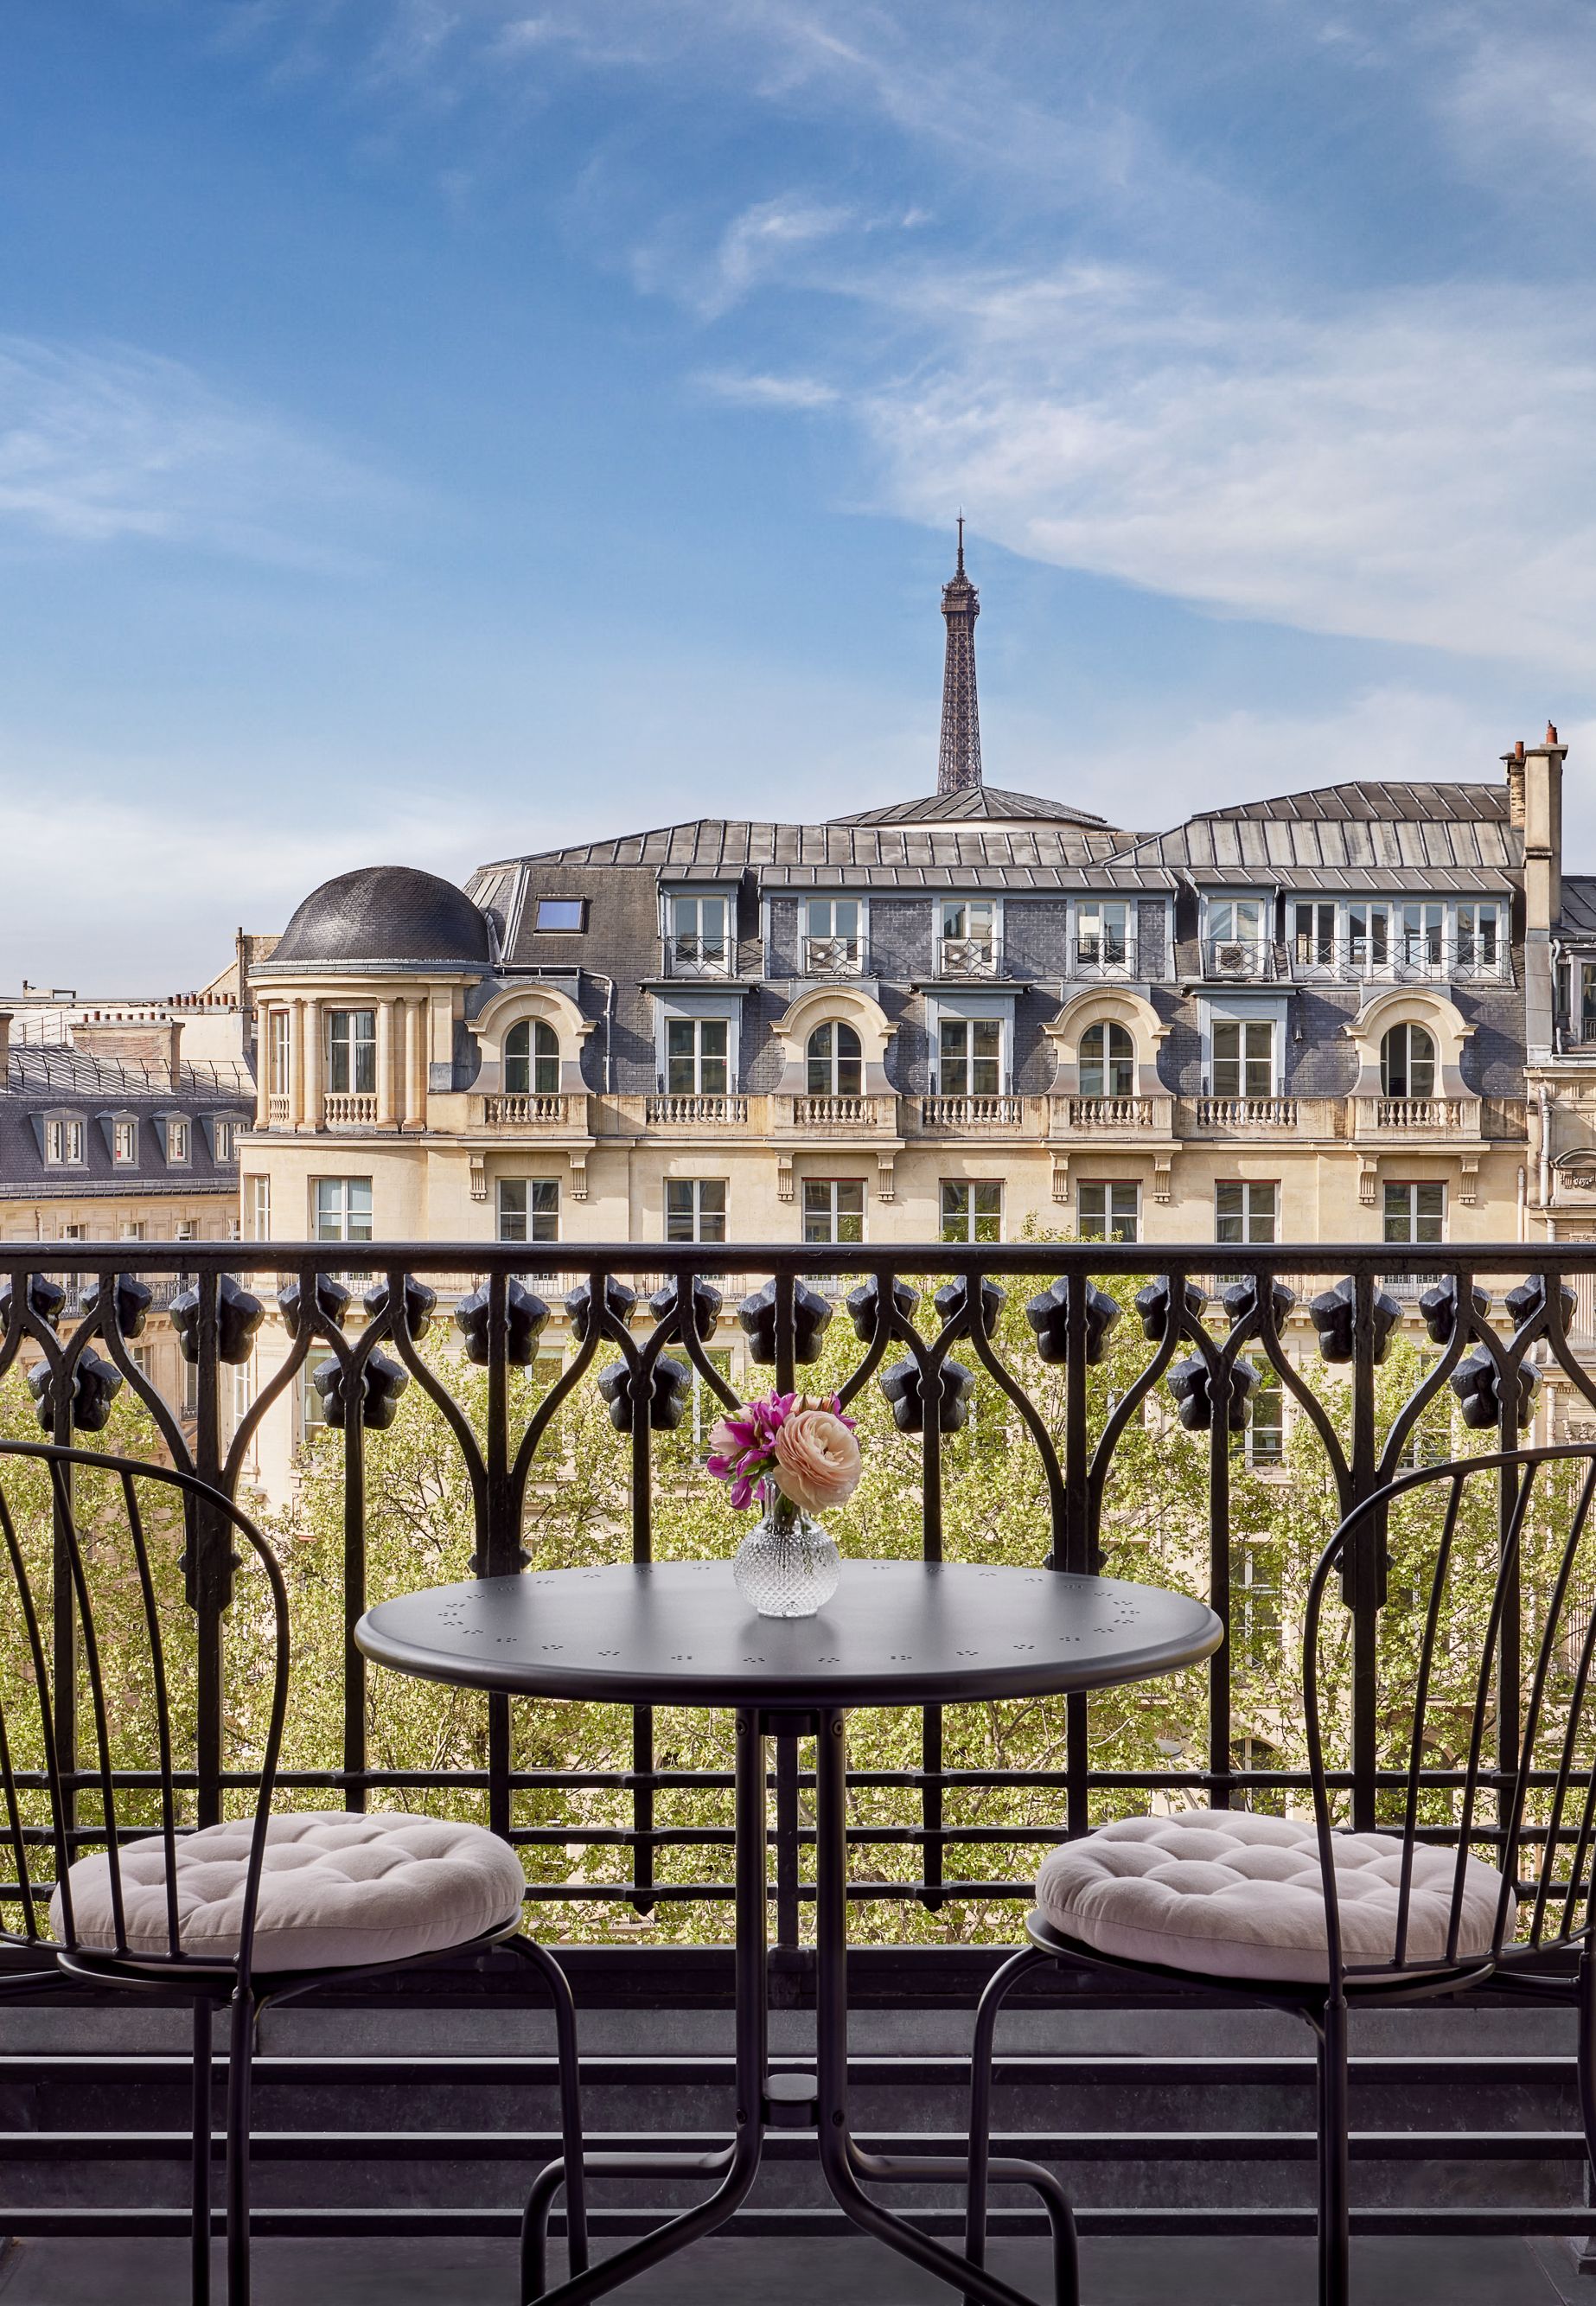 21 Dreamy Paris Hotels With A View Of The Eiffel Tower - Follow Me Away